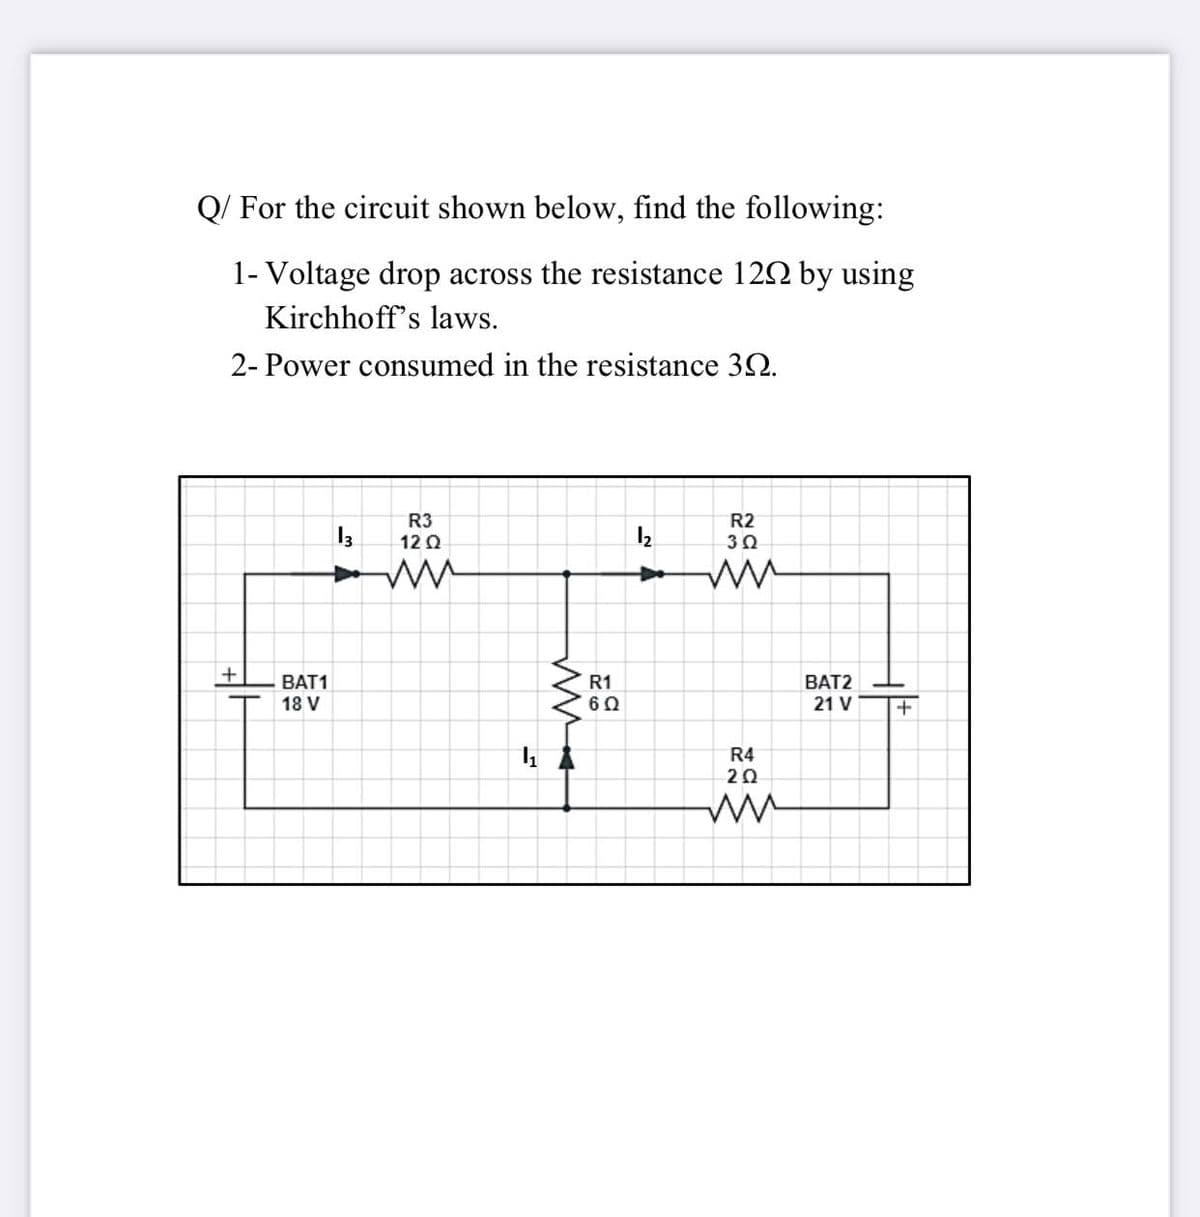 Q/ For the circuit shown below, find the following:
1- Voltage drop across the resistance 122 by using
Kirchhoff's laws.
2- Power consumed in the resistance 32.
R3
12 0
R2
30
BAT1
R1
60
BAT2
18 V
21 V
R4
20
